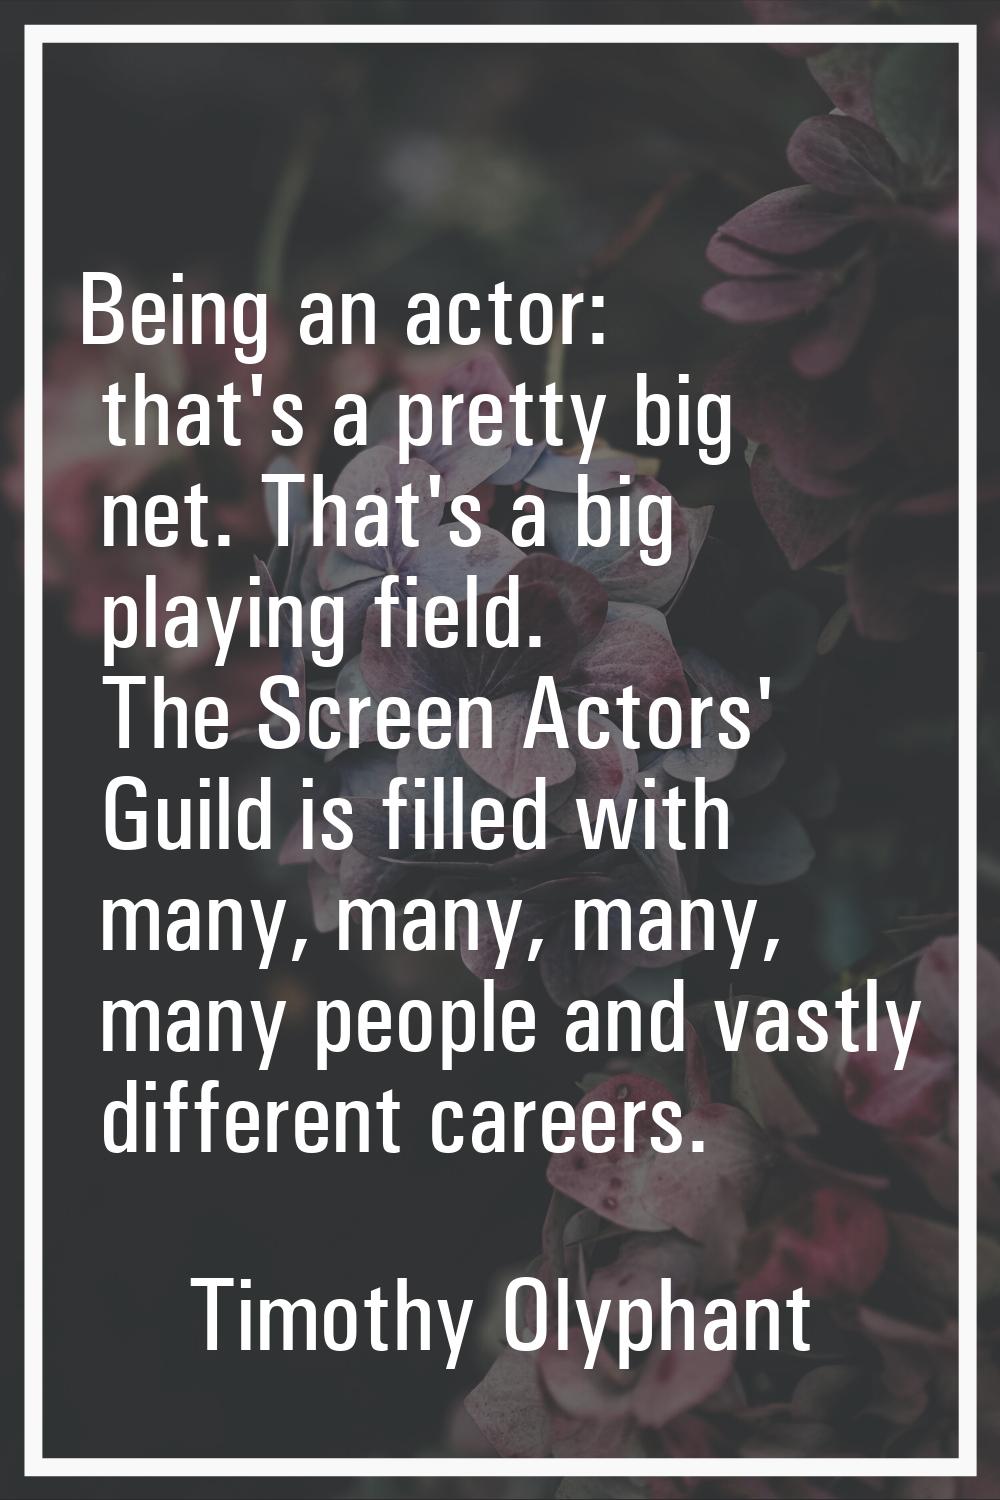 Being an actor: that's a pretty big net. That's a big playing field. The Screen Actors' Guild is fi